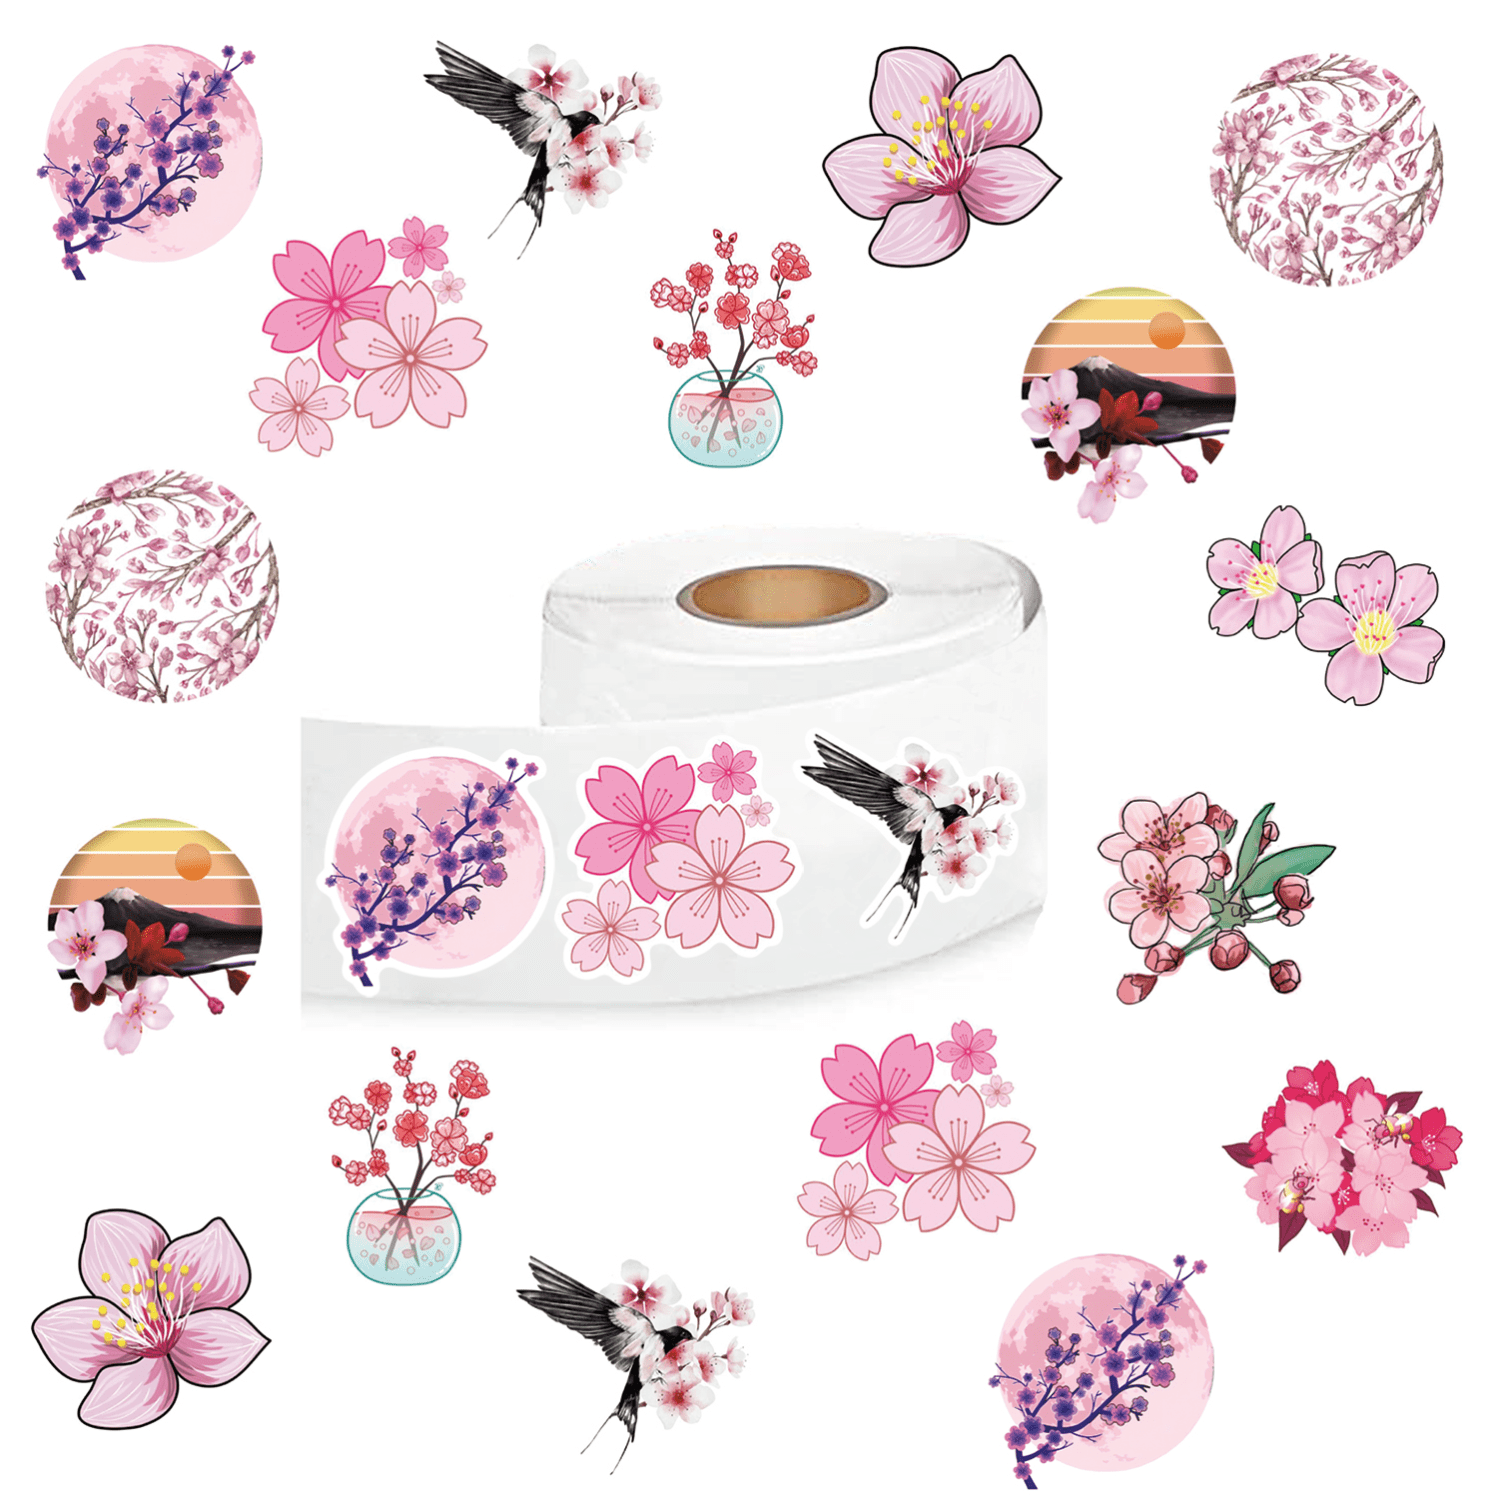 

500pcs Cherry Blossom Stickers, Cute Cartoon Decals Rolls Self Adhesive Seals For Scrapbooking Cards Envelopes Handmade, Gifts For Teens Adults Party Supply (1inch Labels/ 10 Patterns )